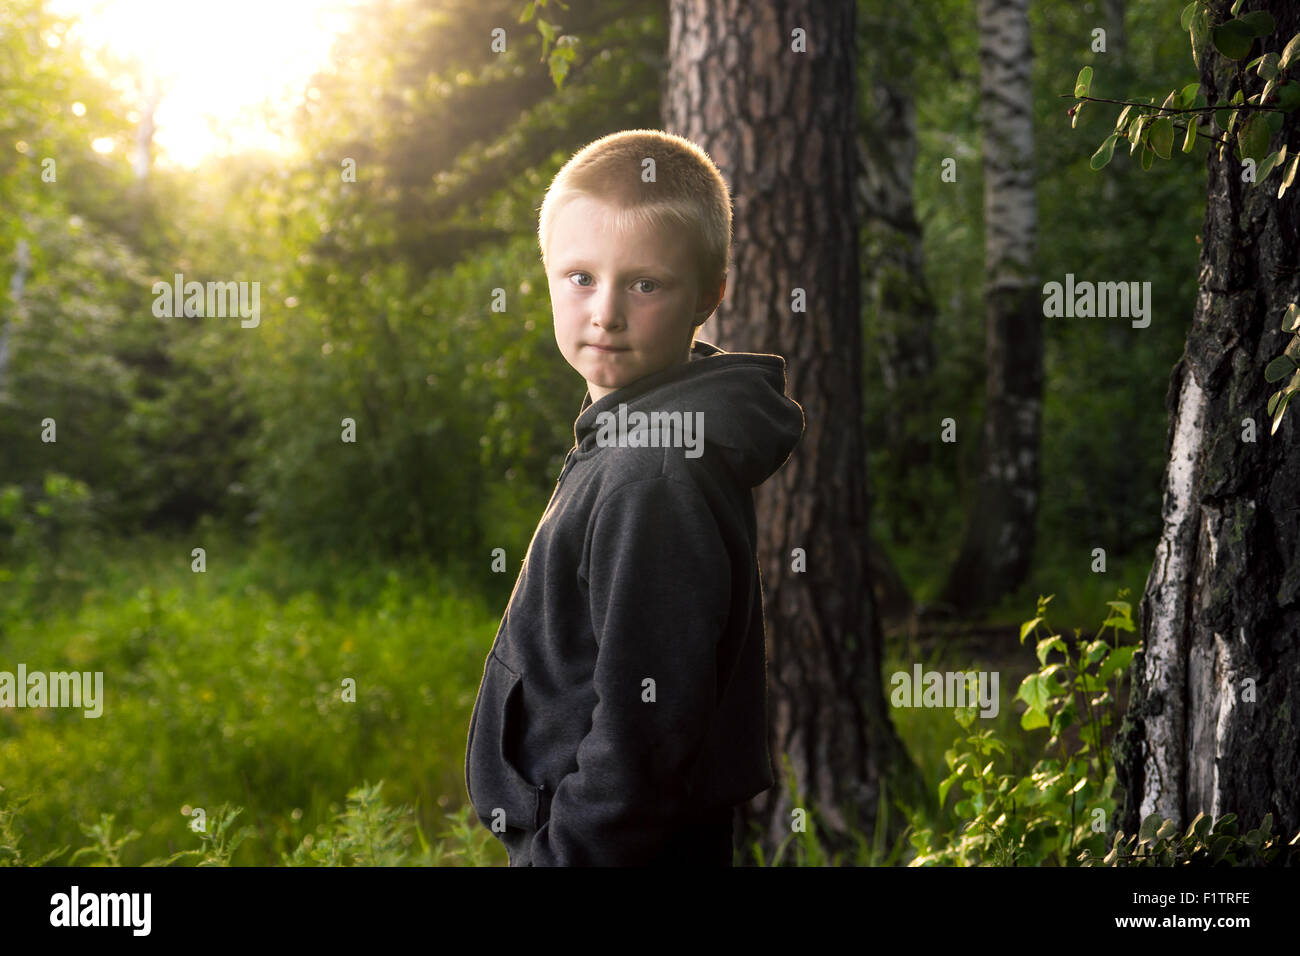 Child (boy) walking alone in green forest Stock Photo